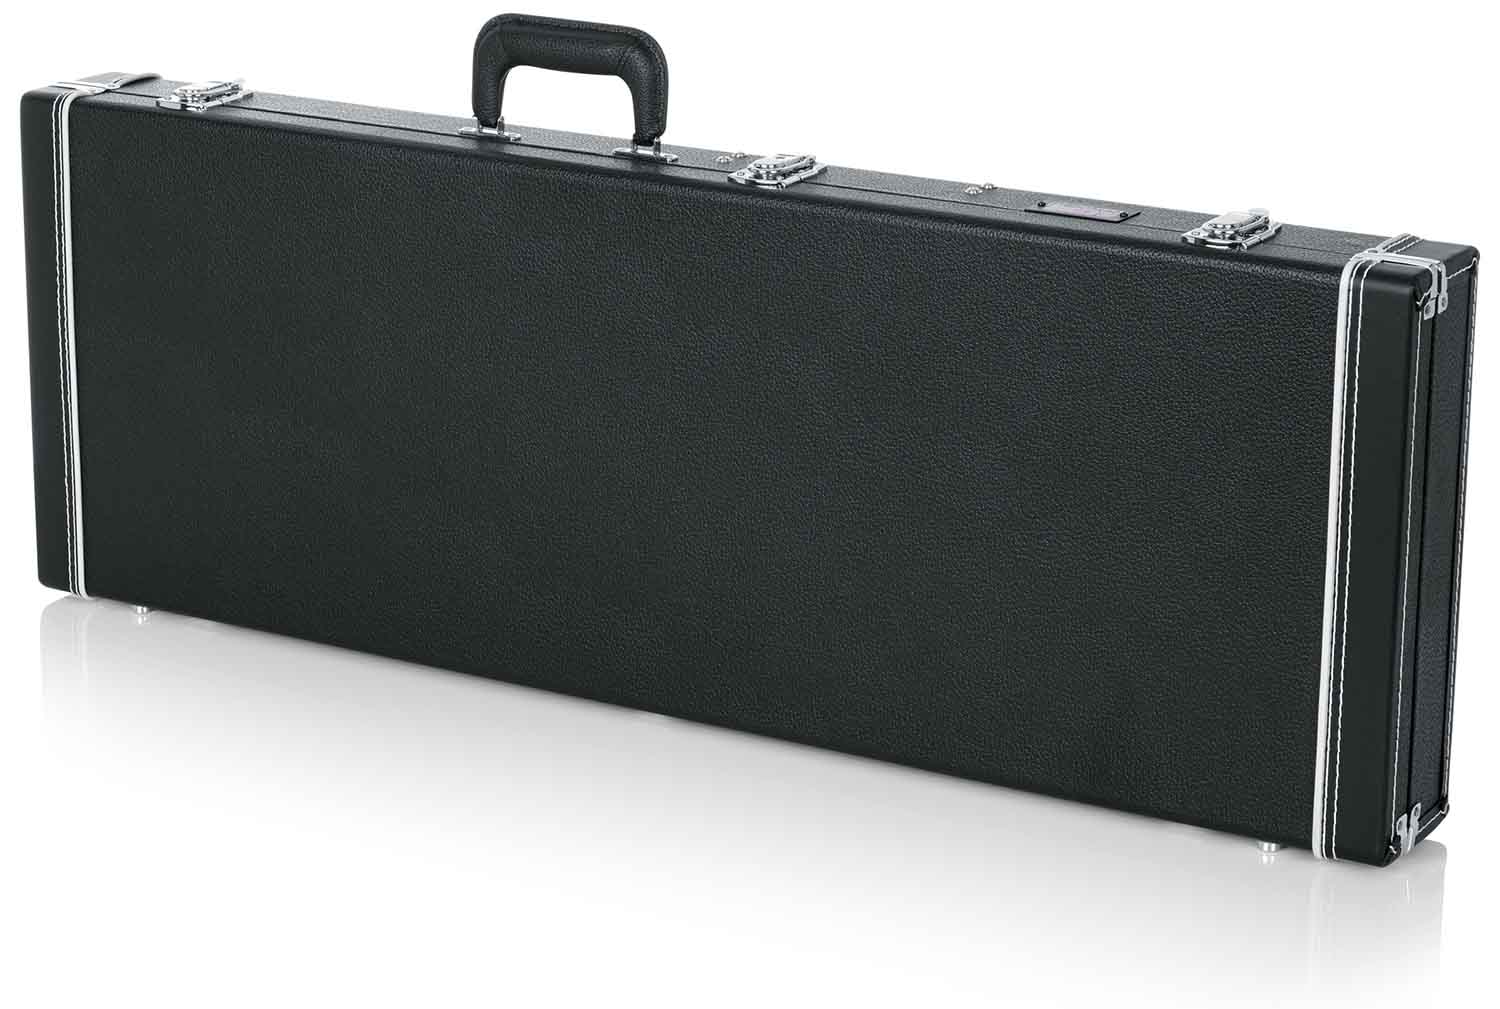 Gator Cases GW-ELECTRIC Deluxe Wood Case for Electric Guitars - Black - Hollywood DJ